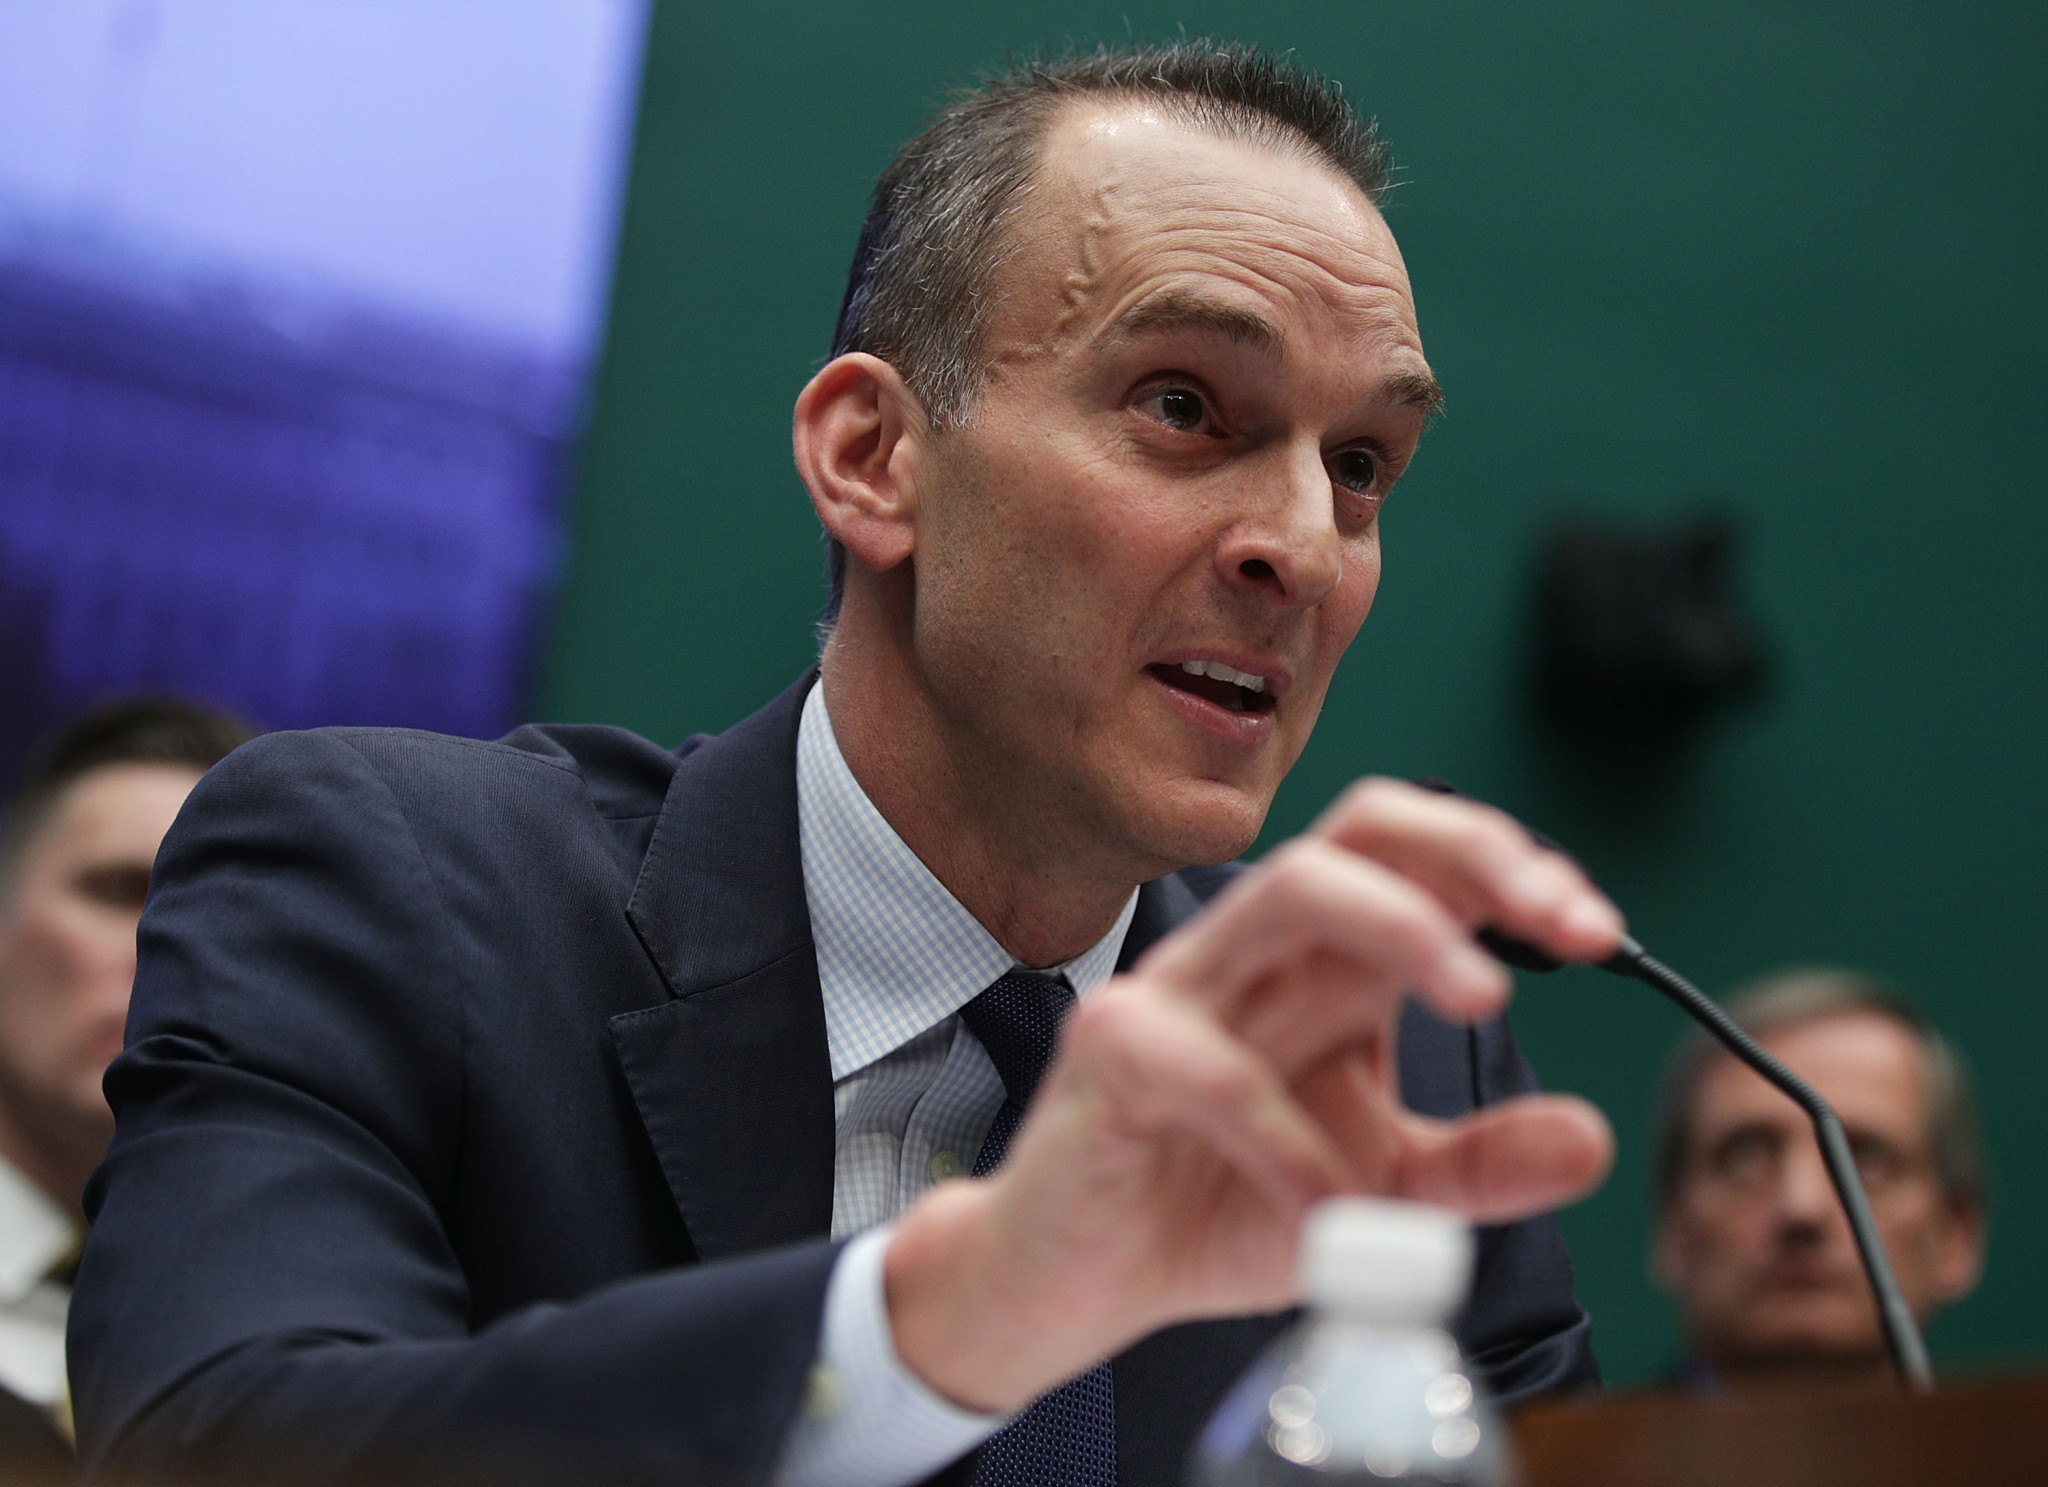 USADA chief Travis Tygart called the IOC's initial lack of response a 